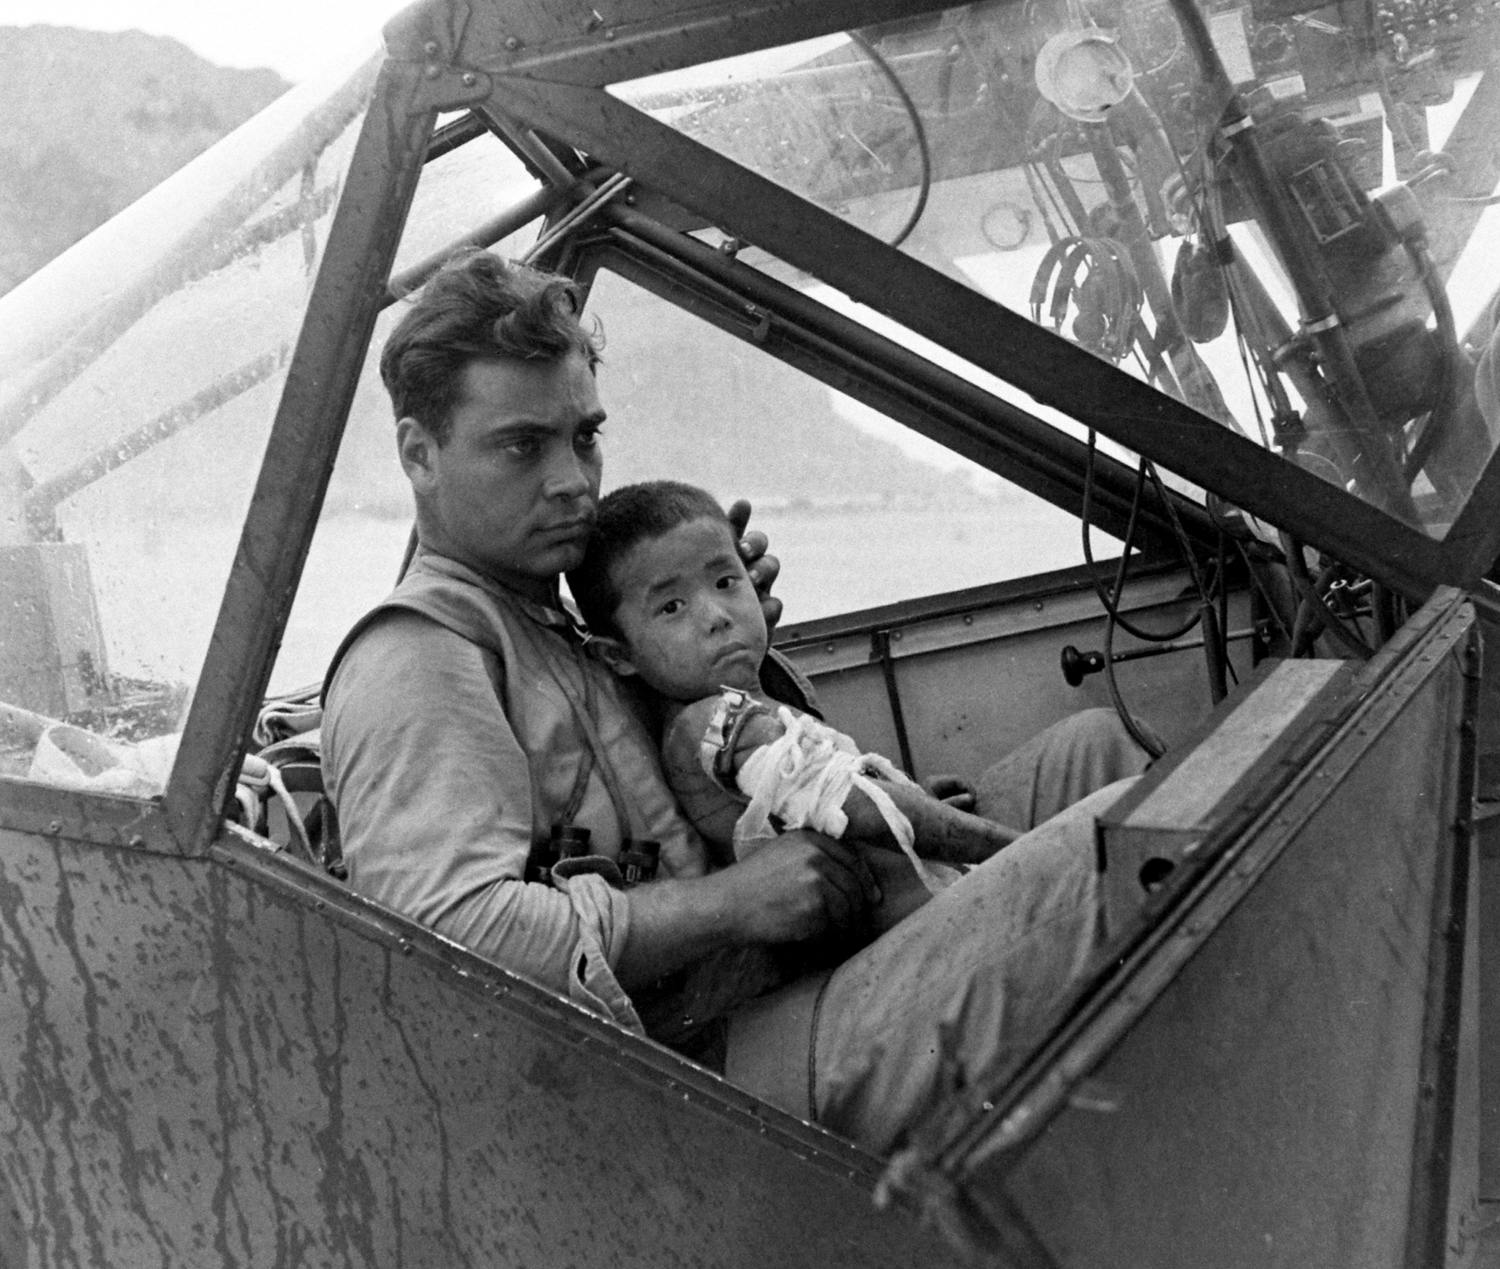 Wounded Japanese child and American pilot, Saipan, 1944.